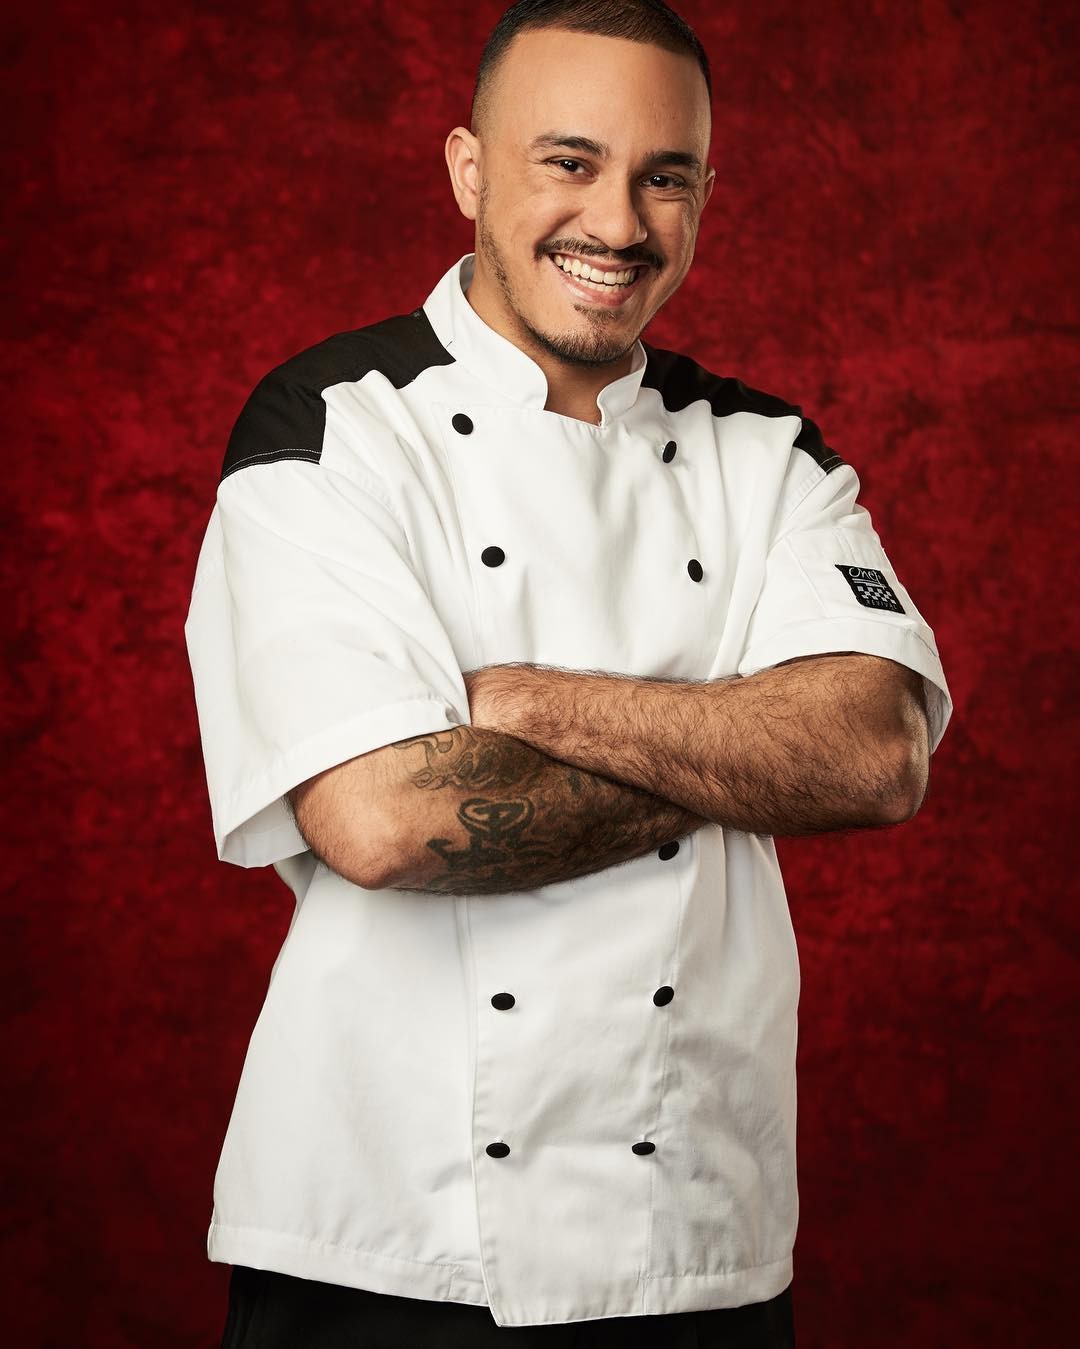 Chef from Sarasota tops on 'Hell's Kitchen